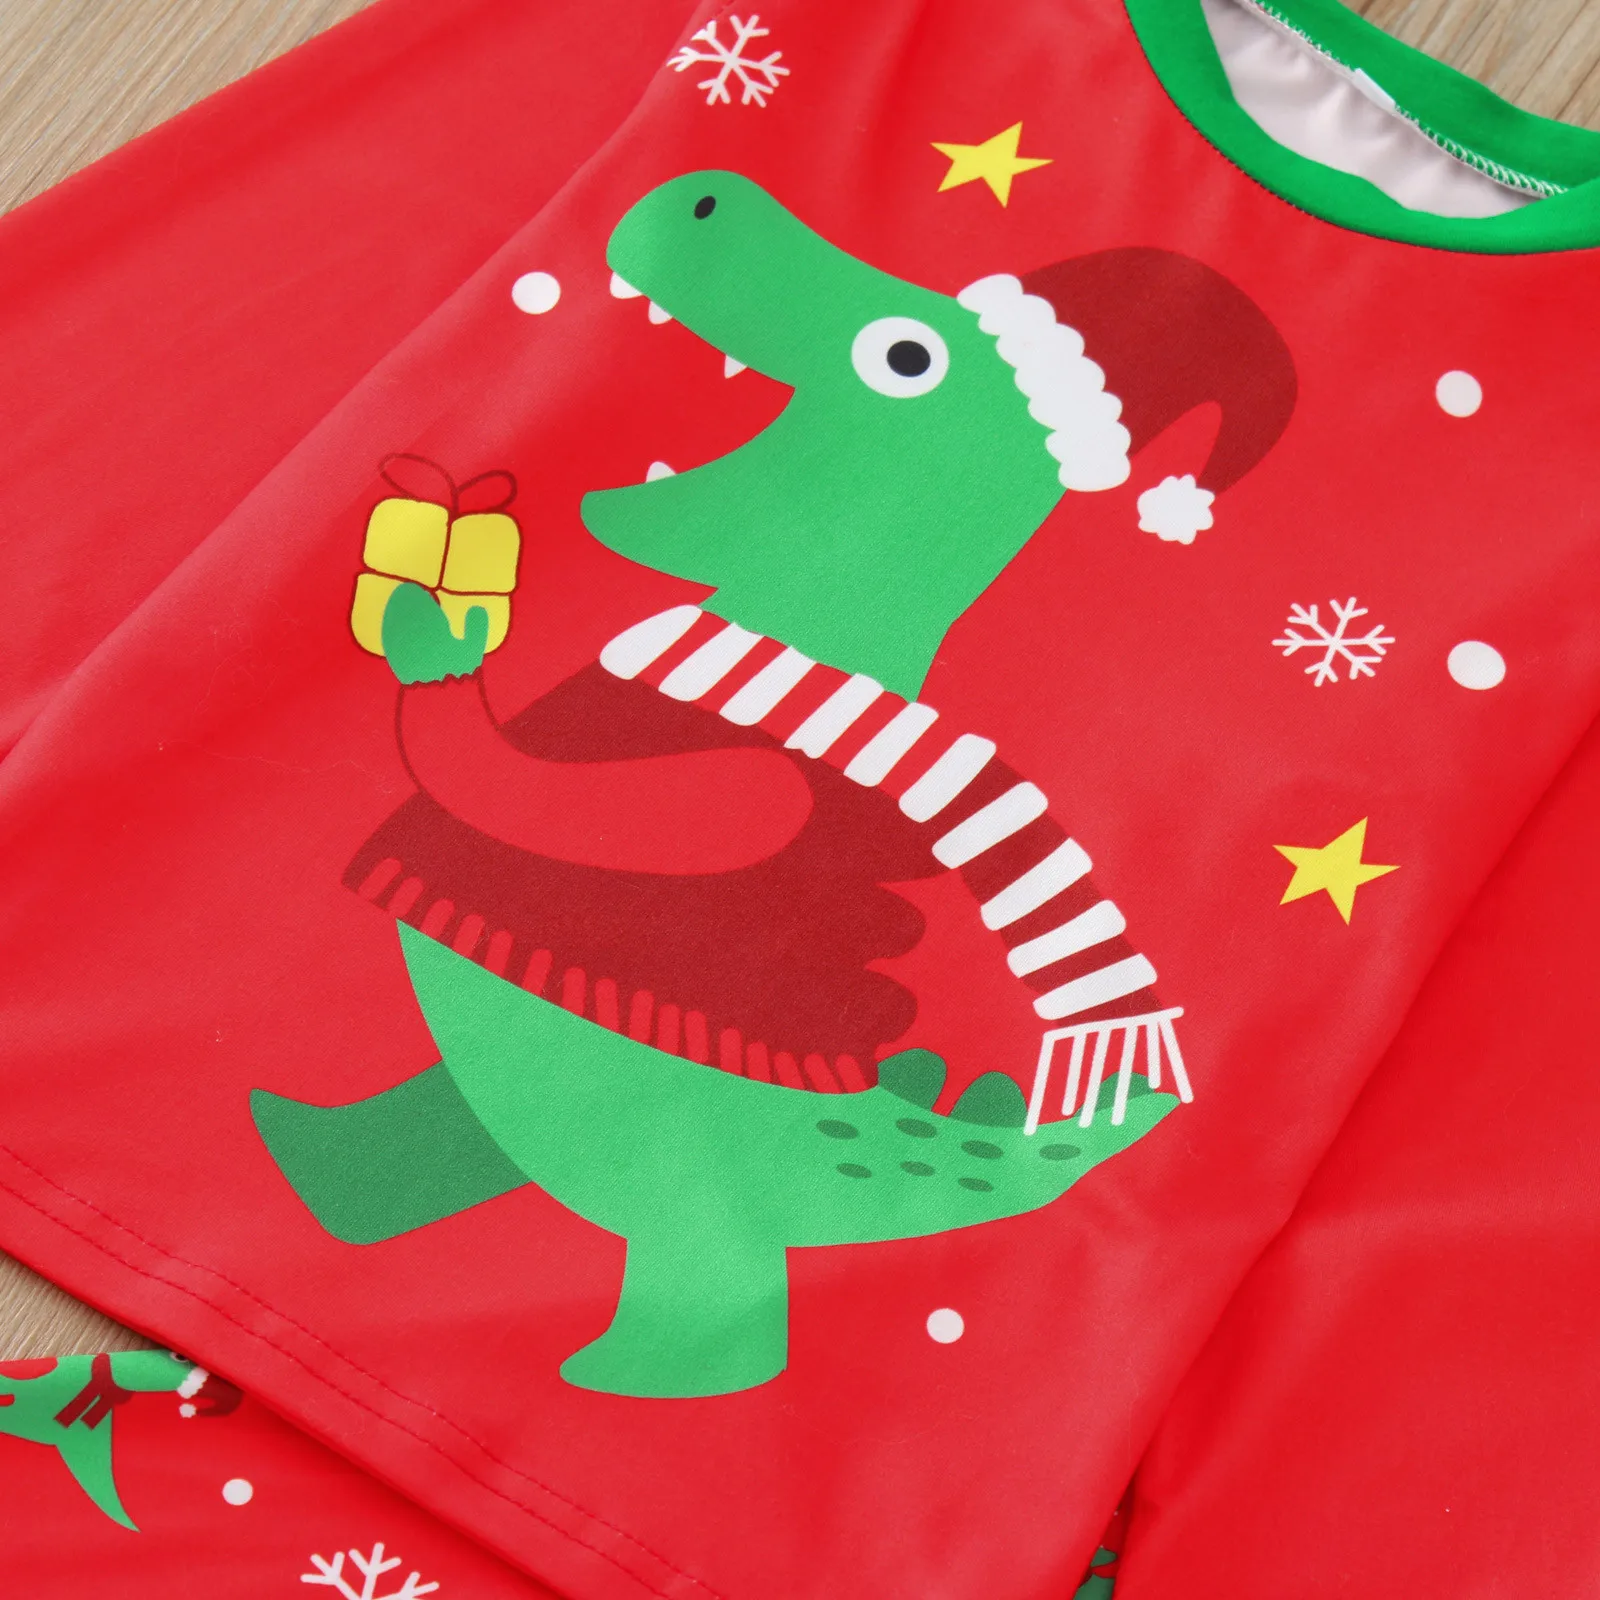 custom pajama sets	 Toddler Baby Kids Boys Warm Pajamas Suit Christmas Pajamas Sleepwear Tops Pants Outfits Suit Casual Clothes Flannel Pants Youth cotton nightgowns